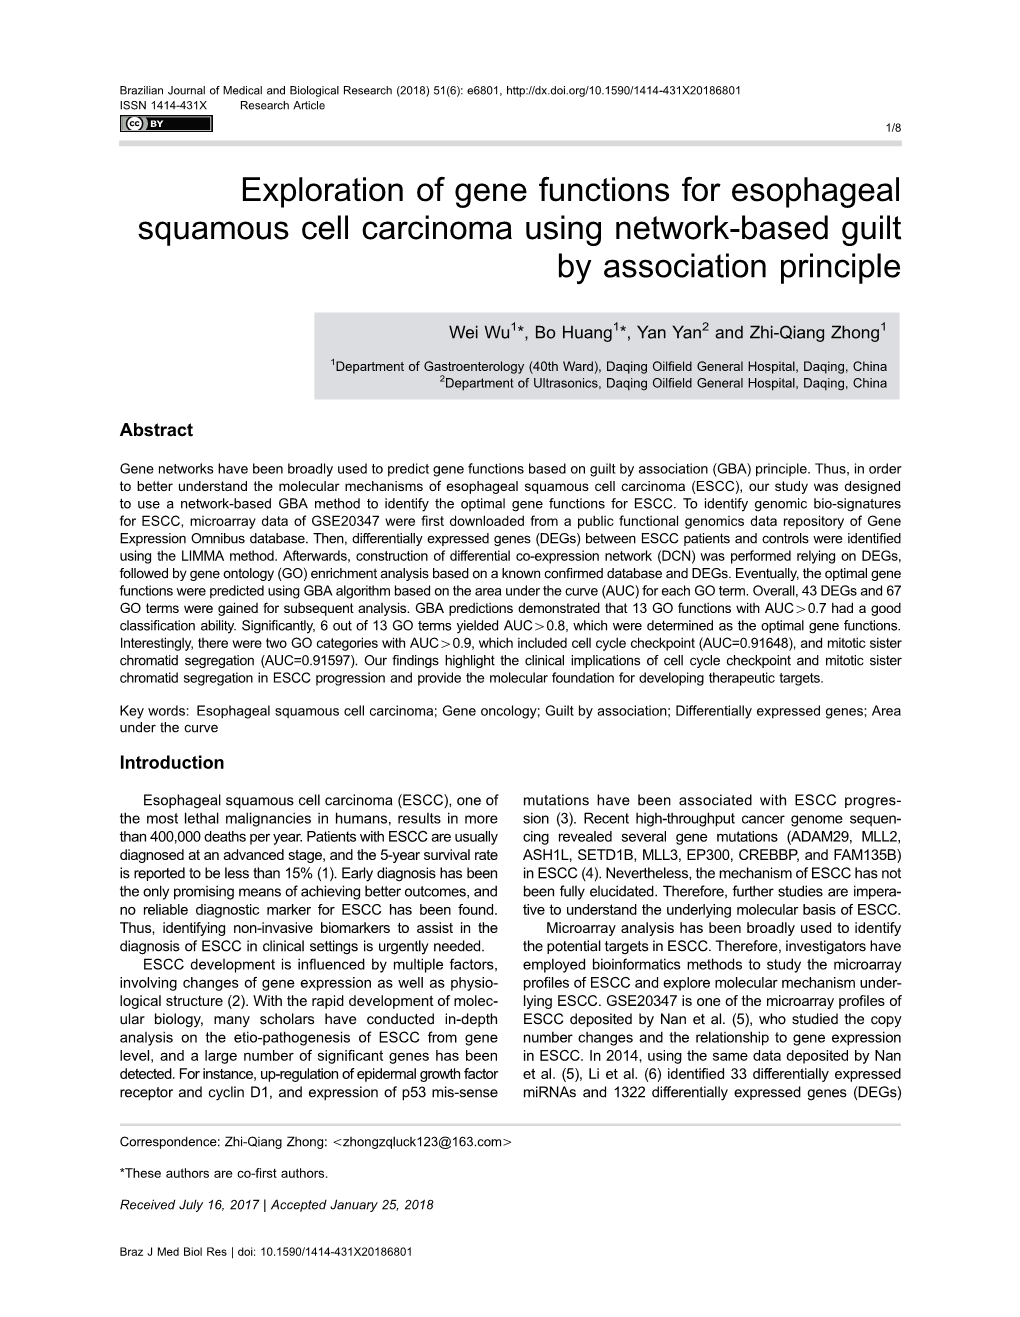 Exploration of Gene Functions for Esophageal Squamous Cell Carcinoma Using Network-Based Guilt by Association Principle